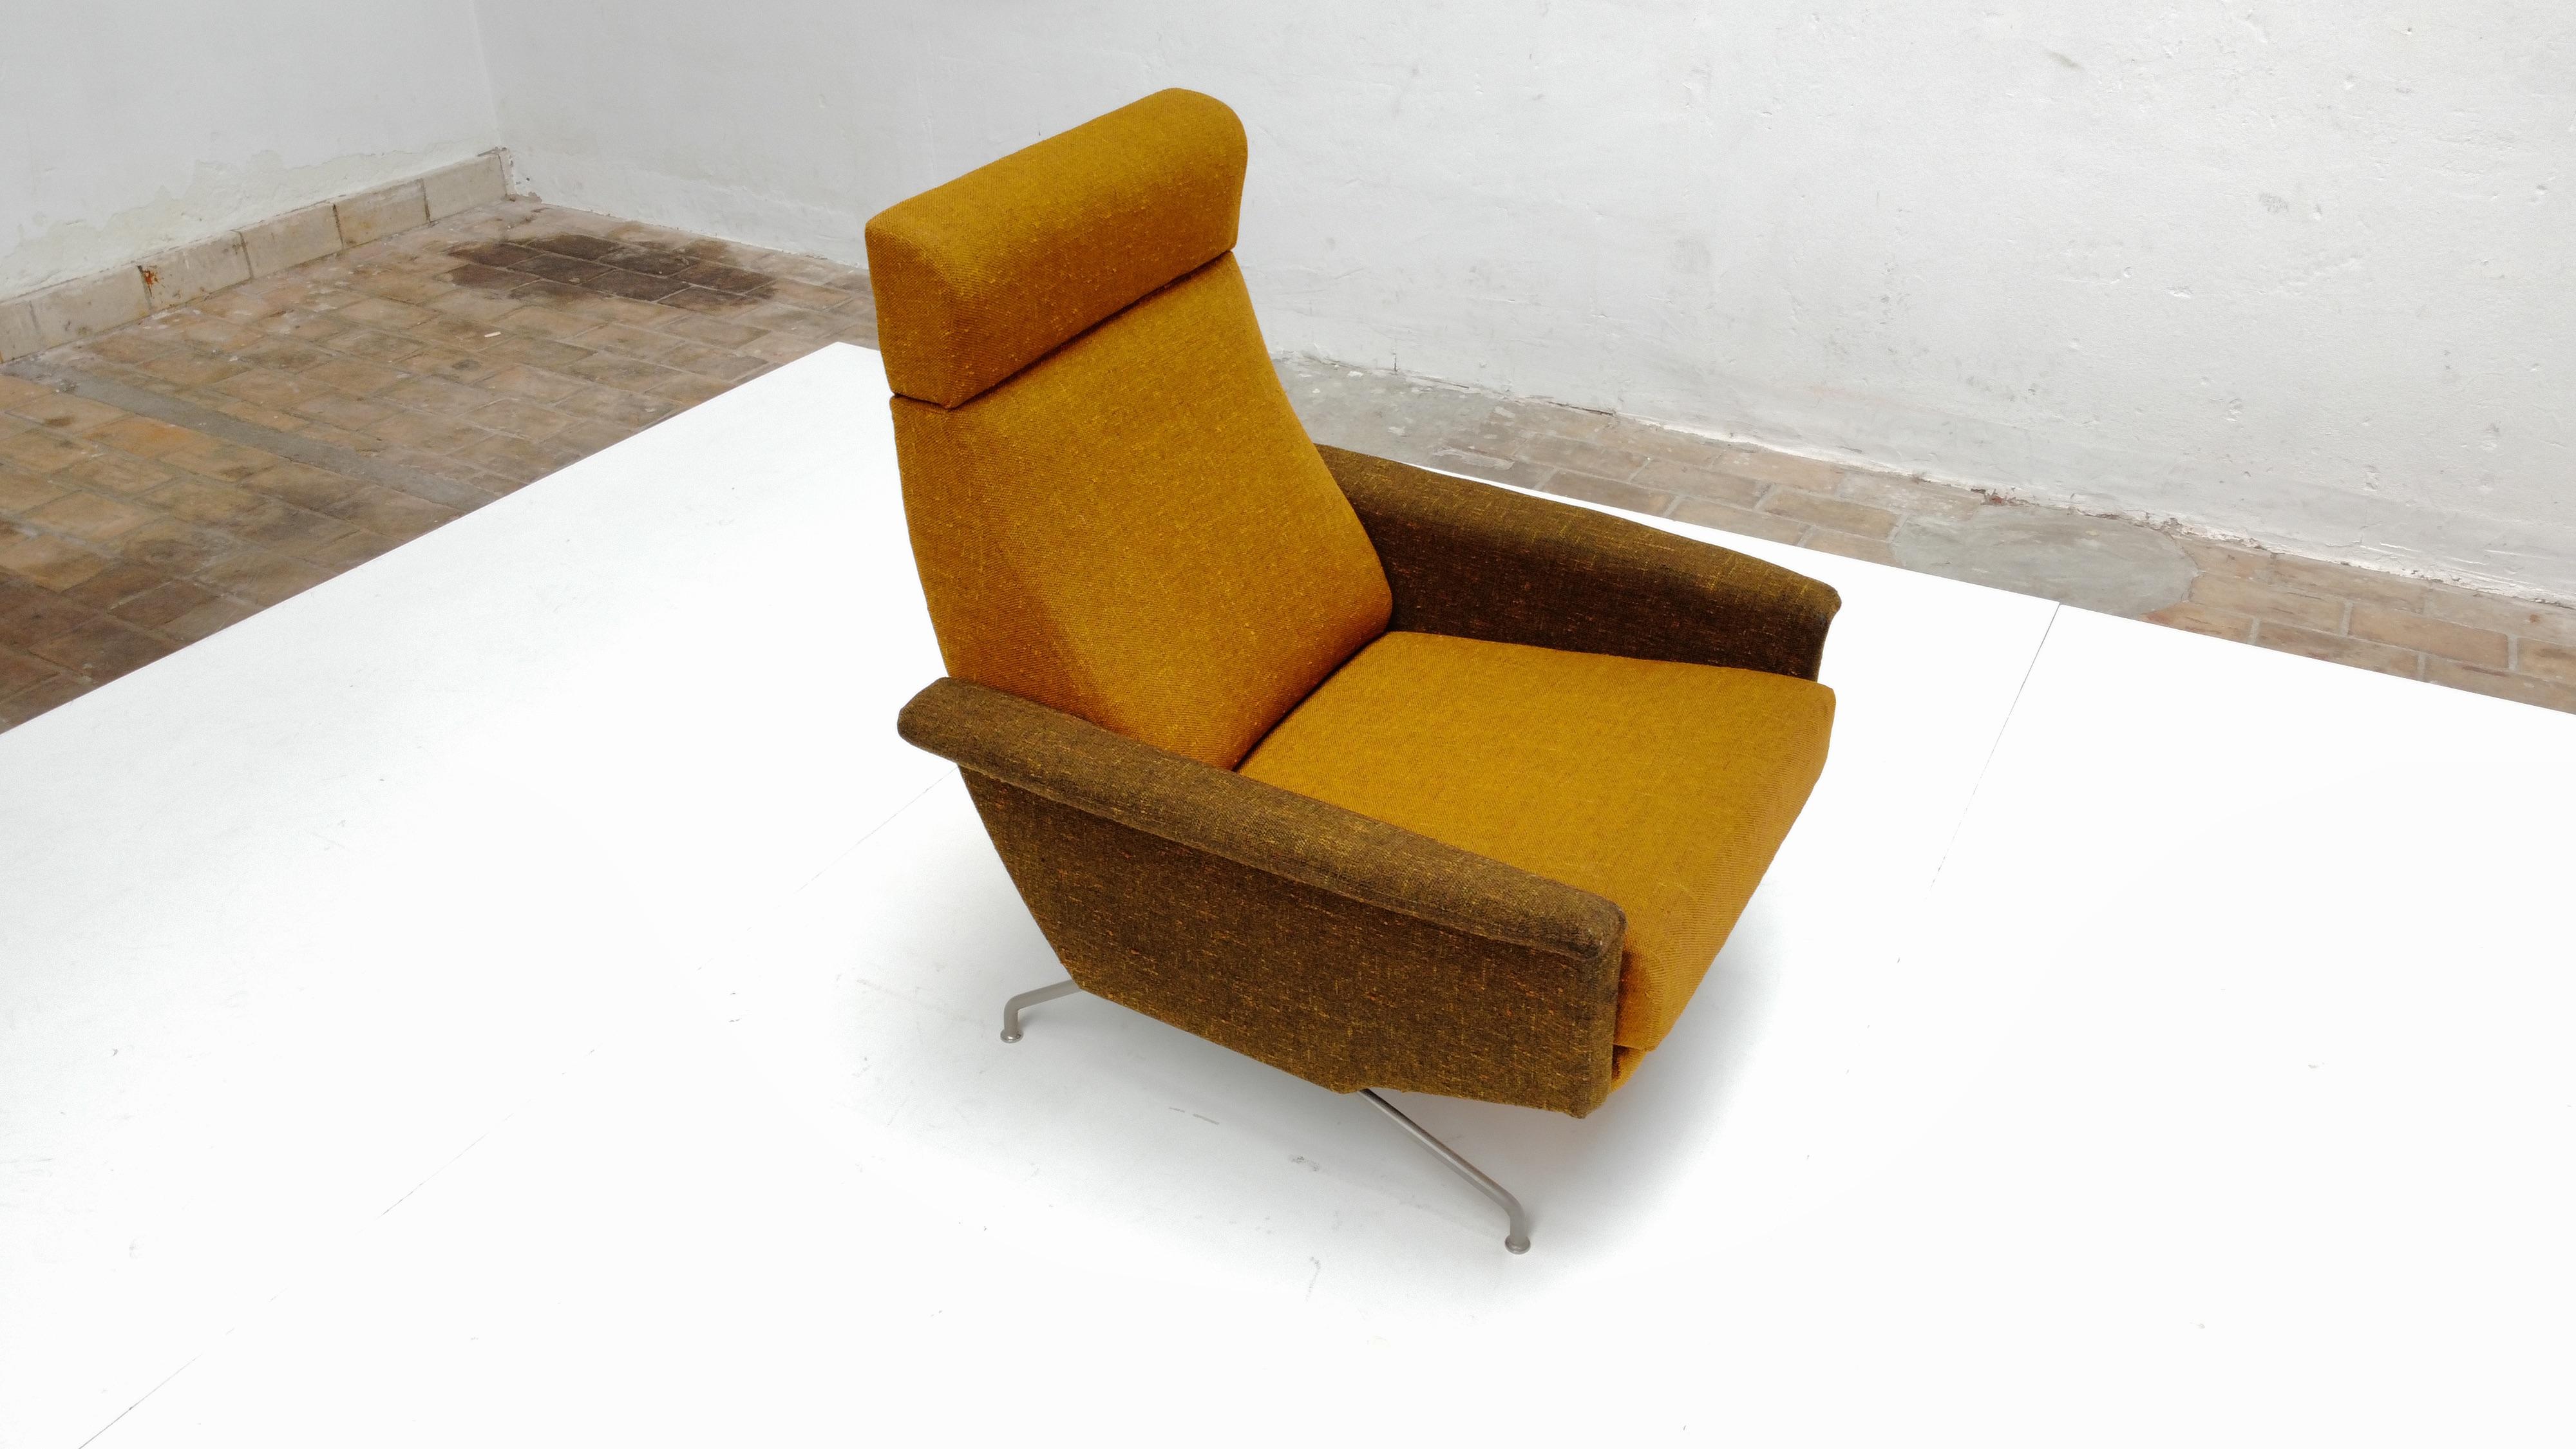 Superb Reclining Lounge Chair by Georges De Rijck for Beaufort Belgium, 1958 1